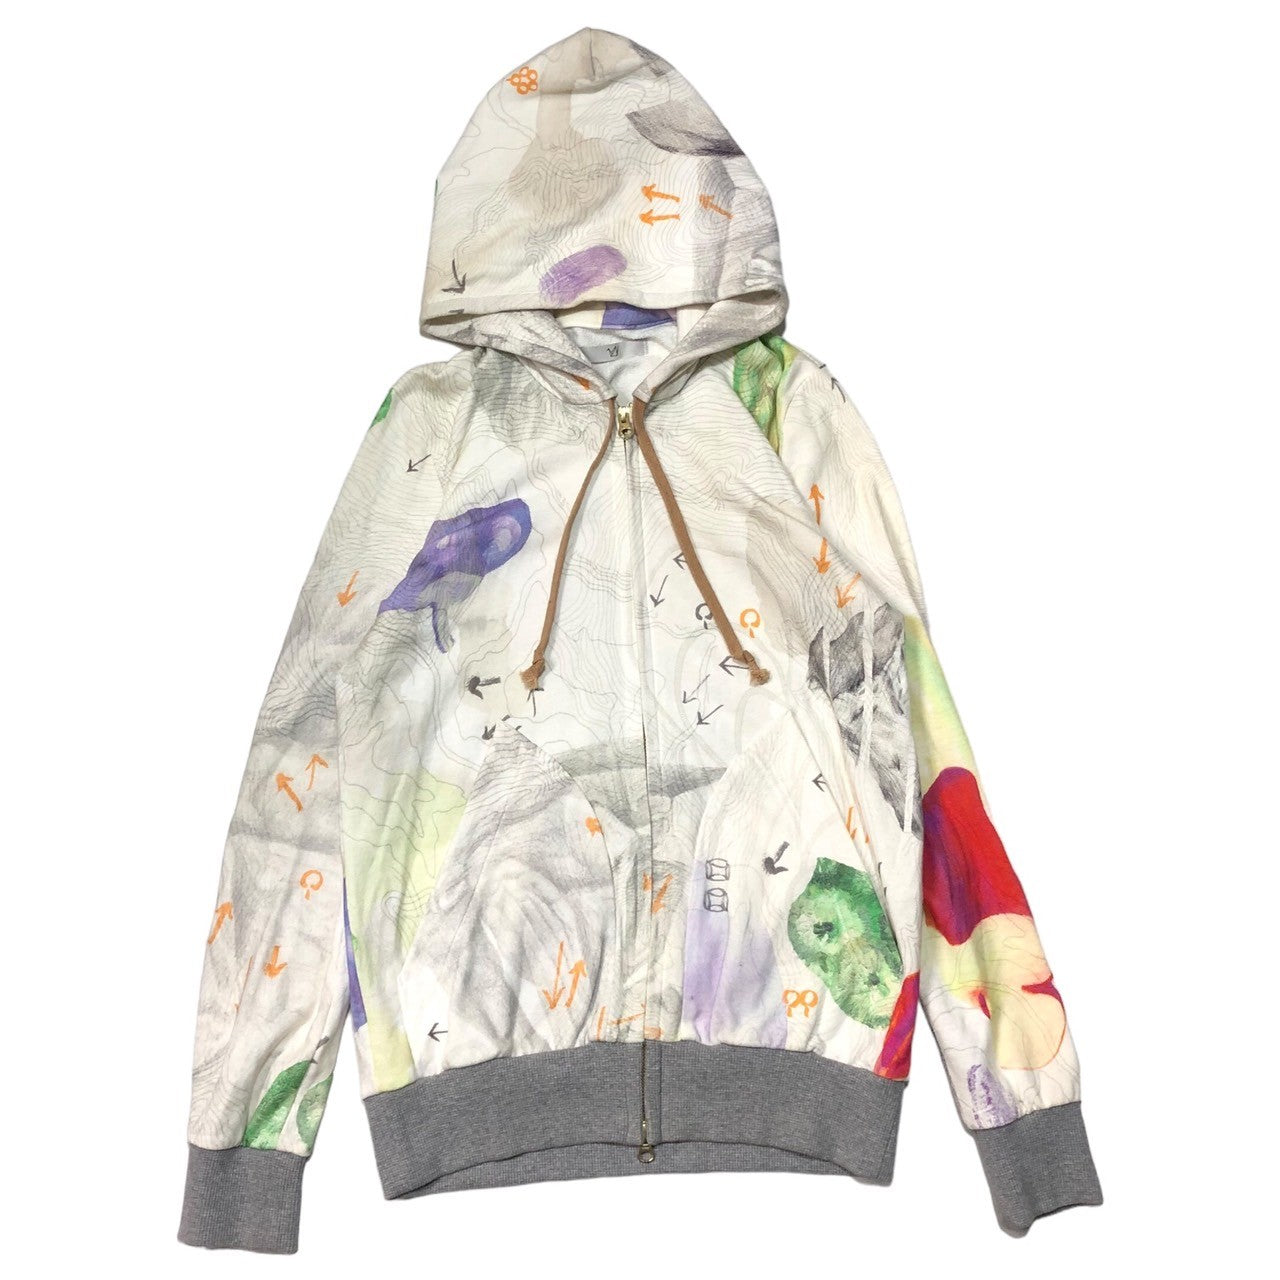 ohta(オオタ) 14SS All-over pattern zip-up hoodie 総柄 ジップアップ 